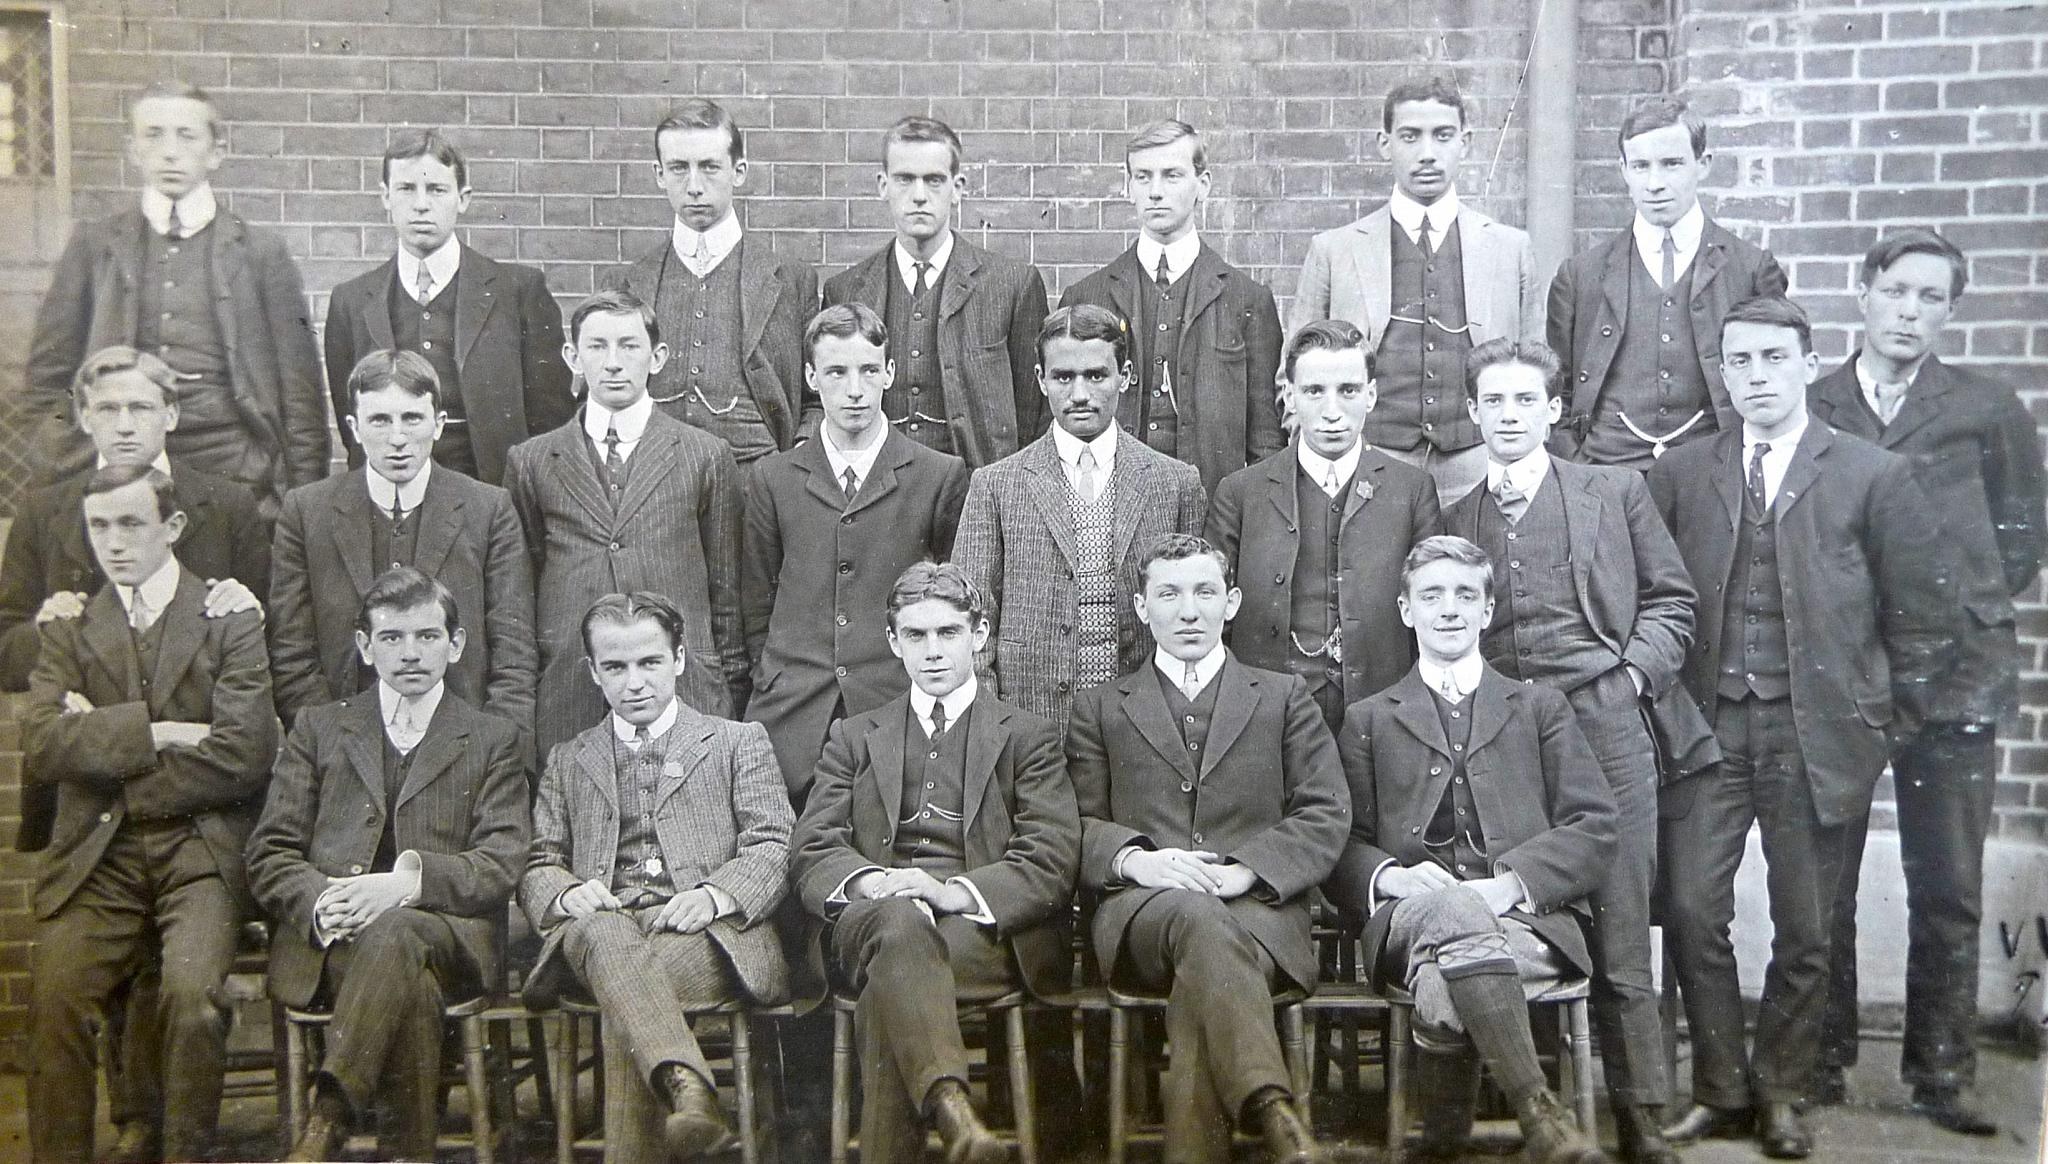 Trainee teachers at Goldsmiths in the early 1900s